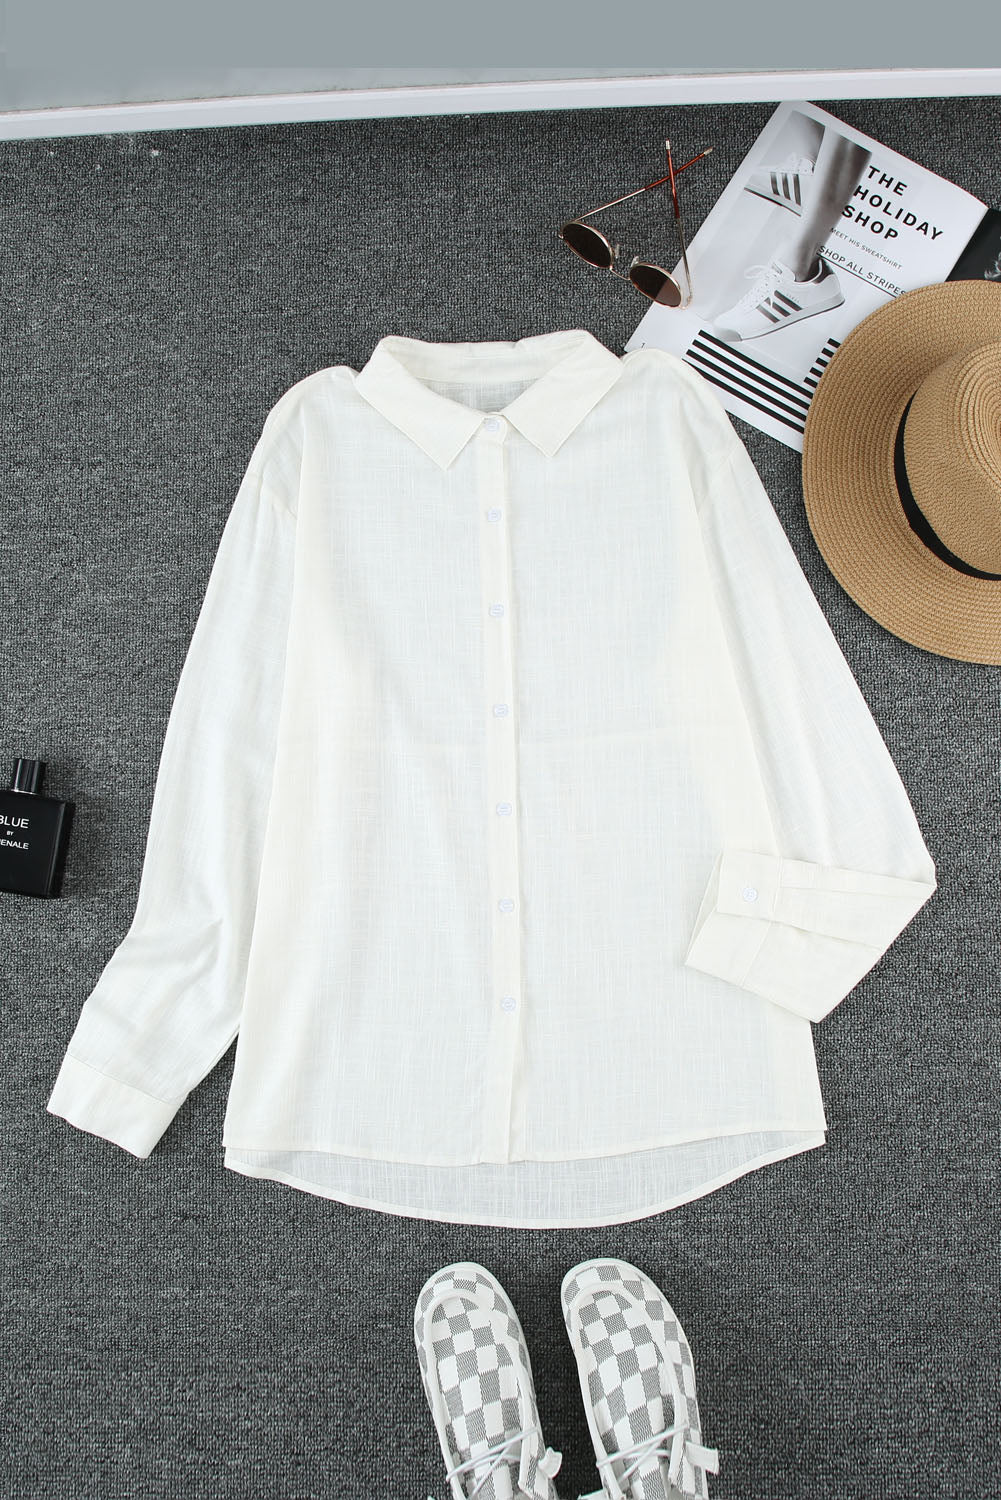 White Textured Solid Color Basic Shirt